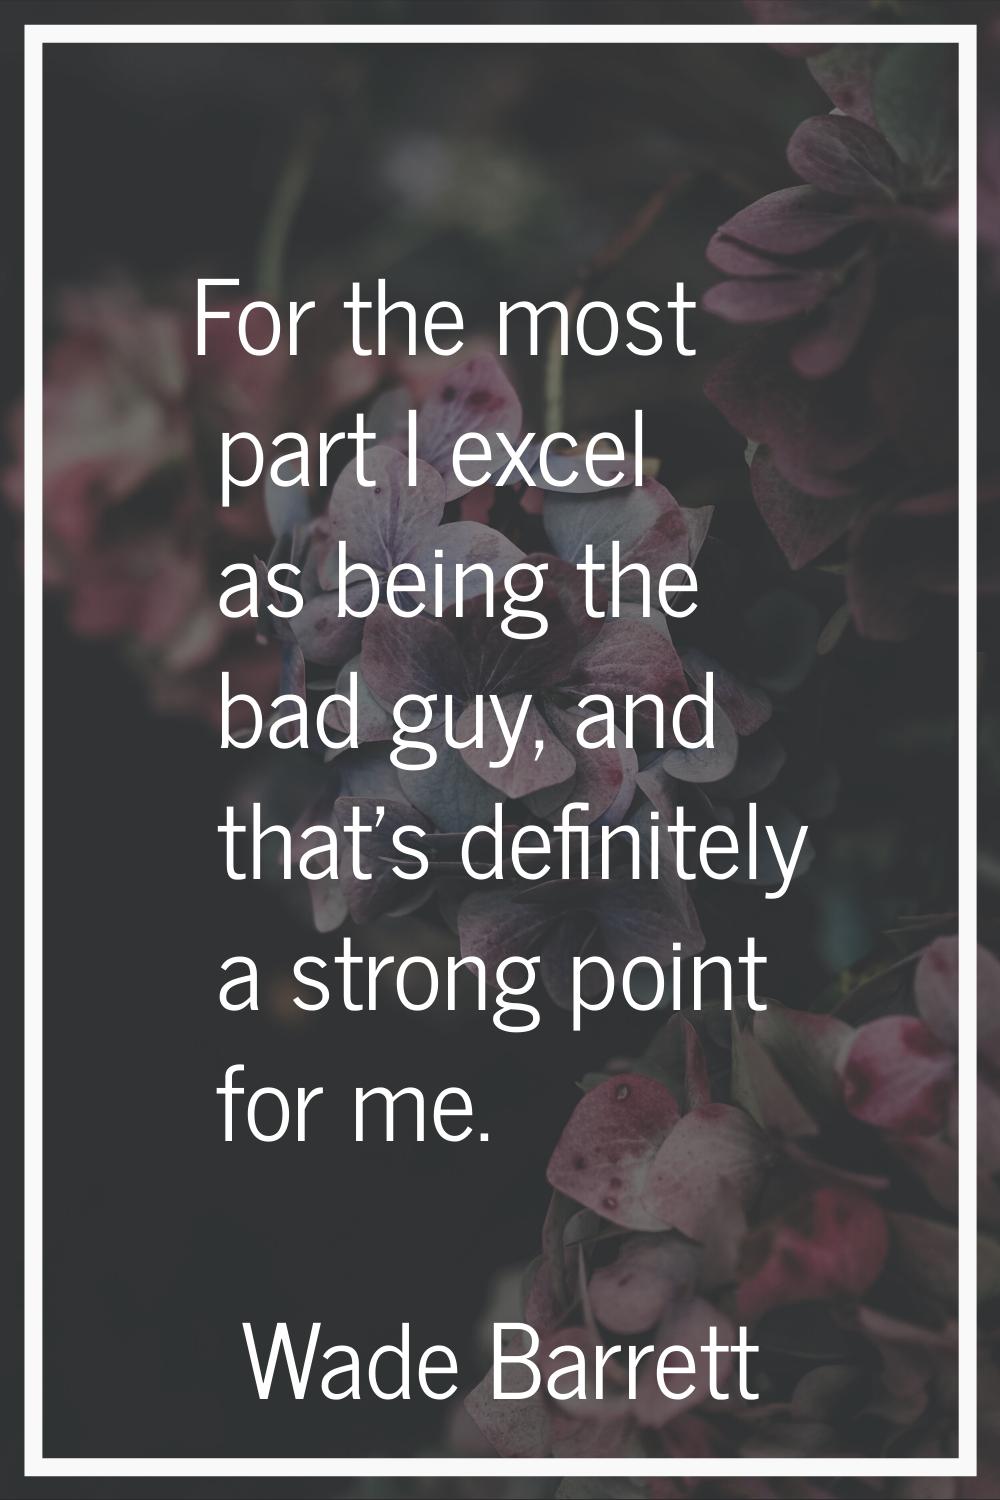 For the most part I excel as being the bad guy, and that's definitely a strong point for me.